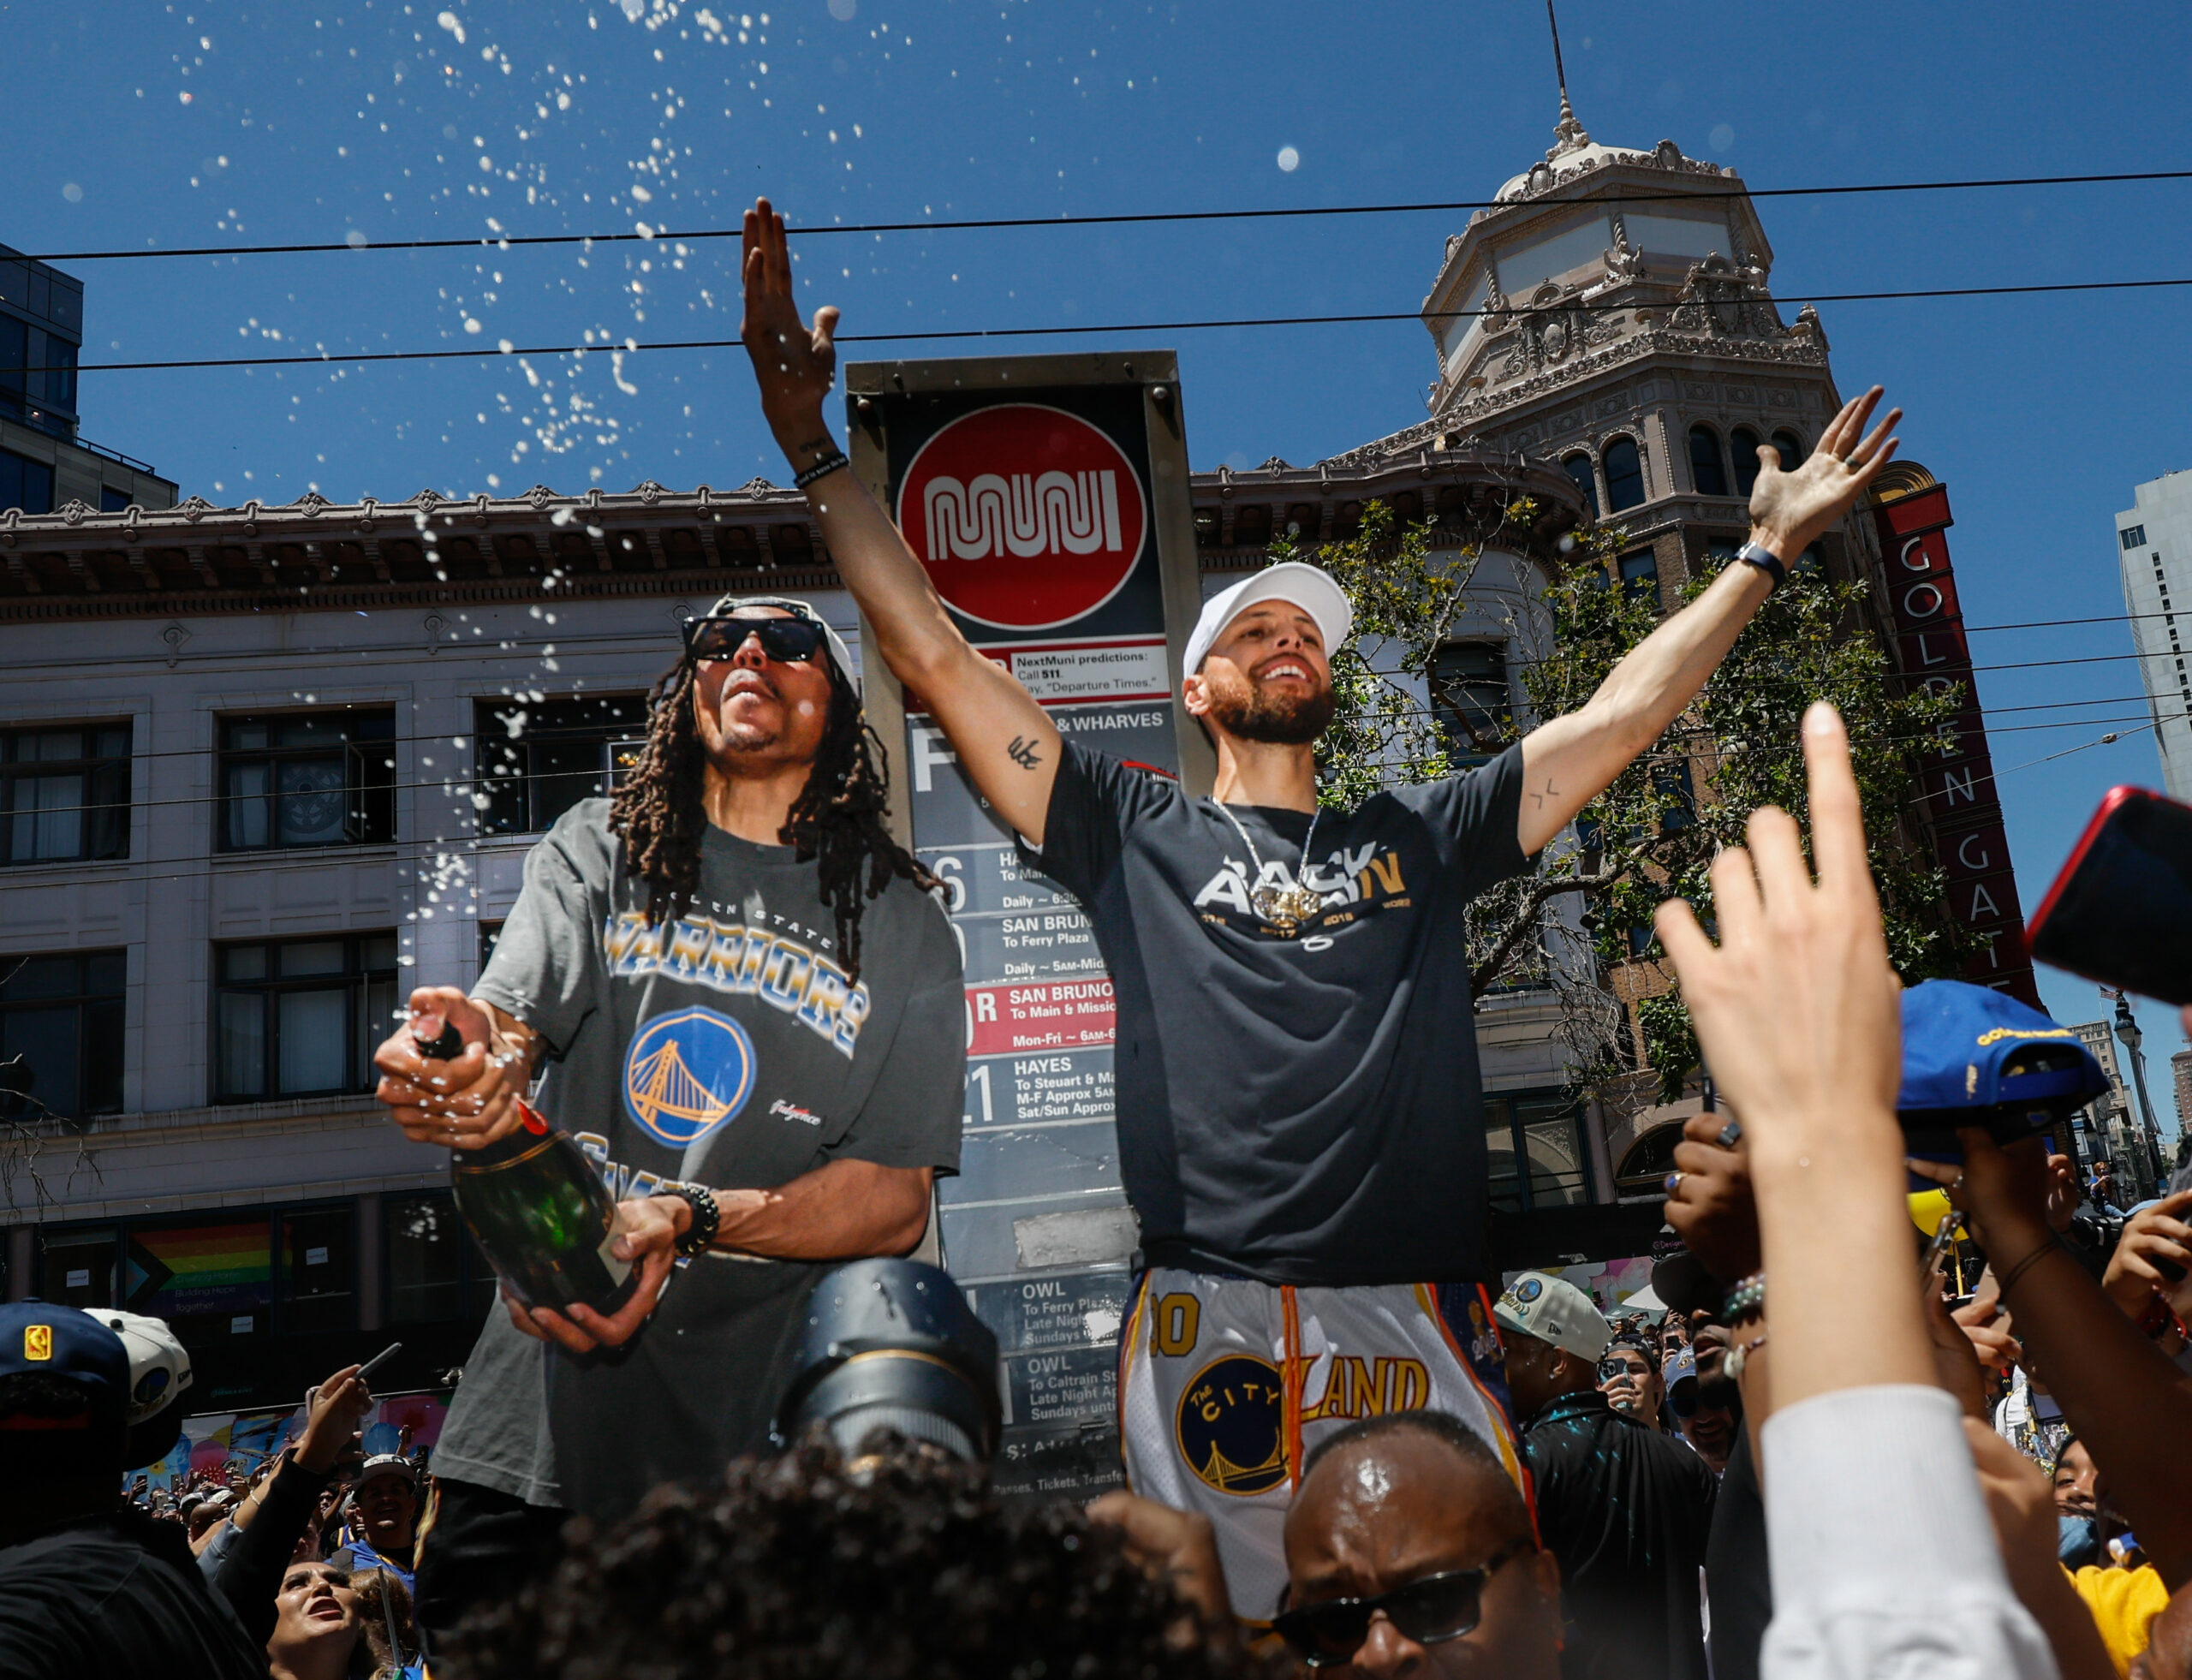 Photos: Fans celebrate as Warriors return to SF for victory parade